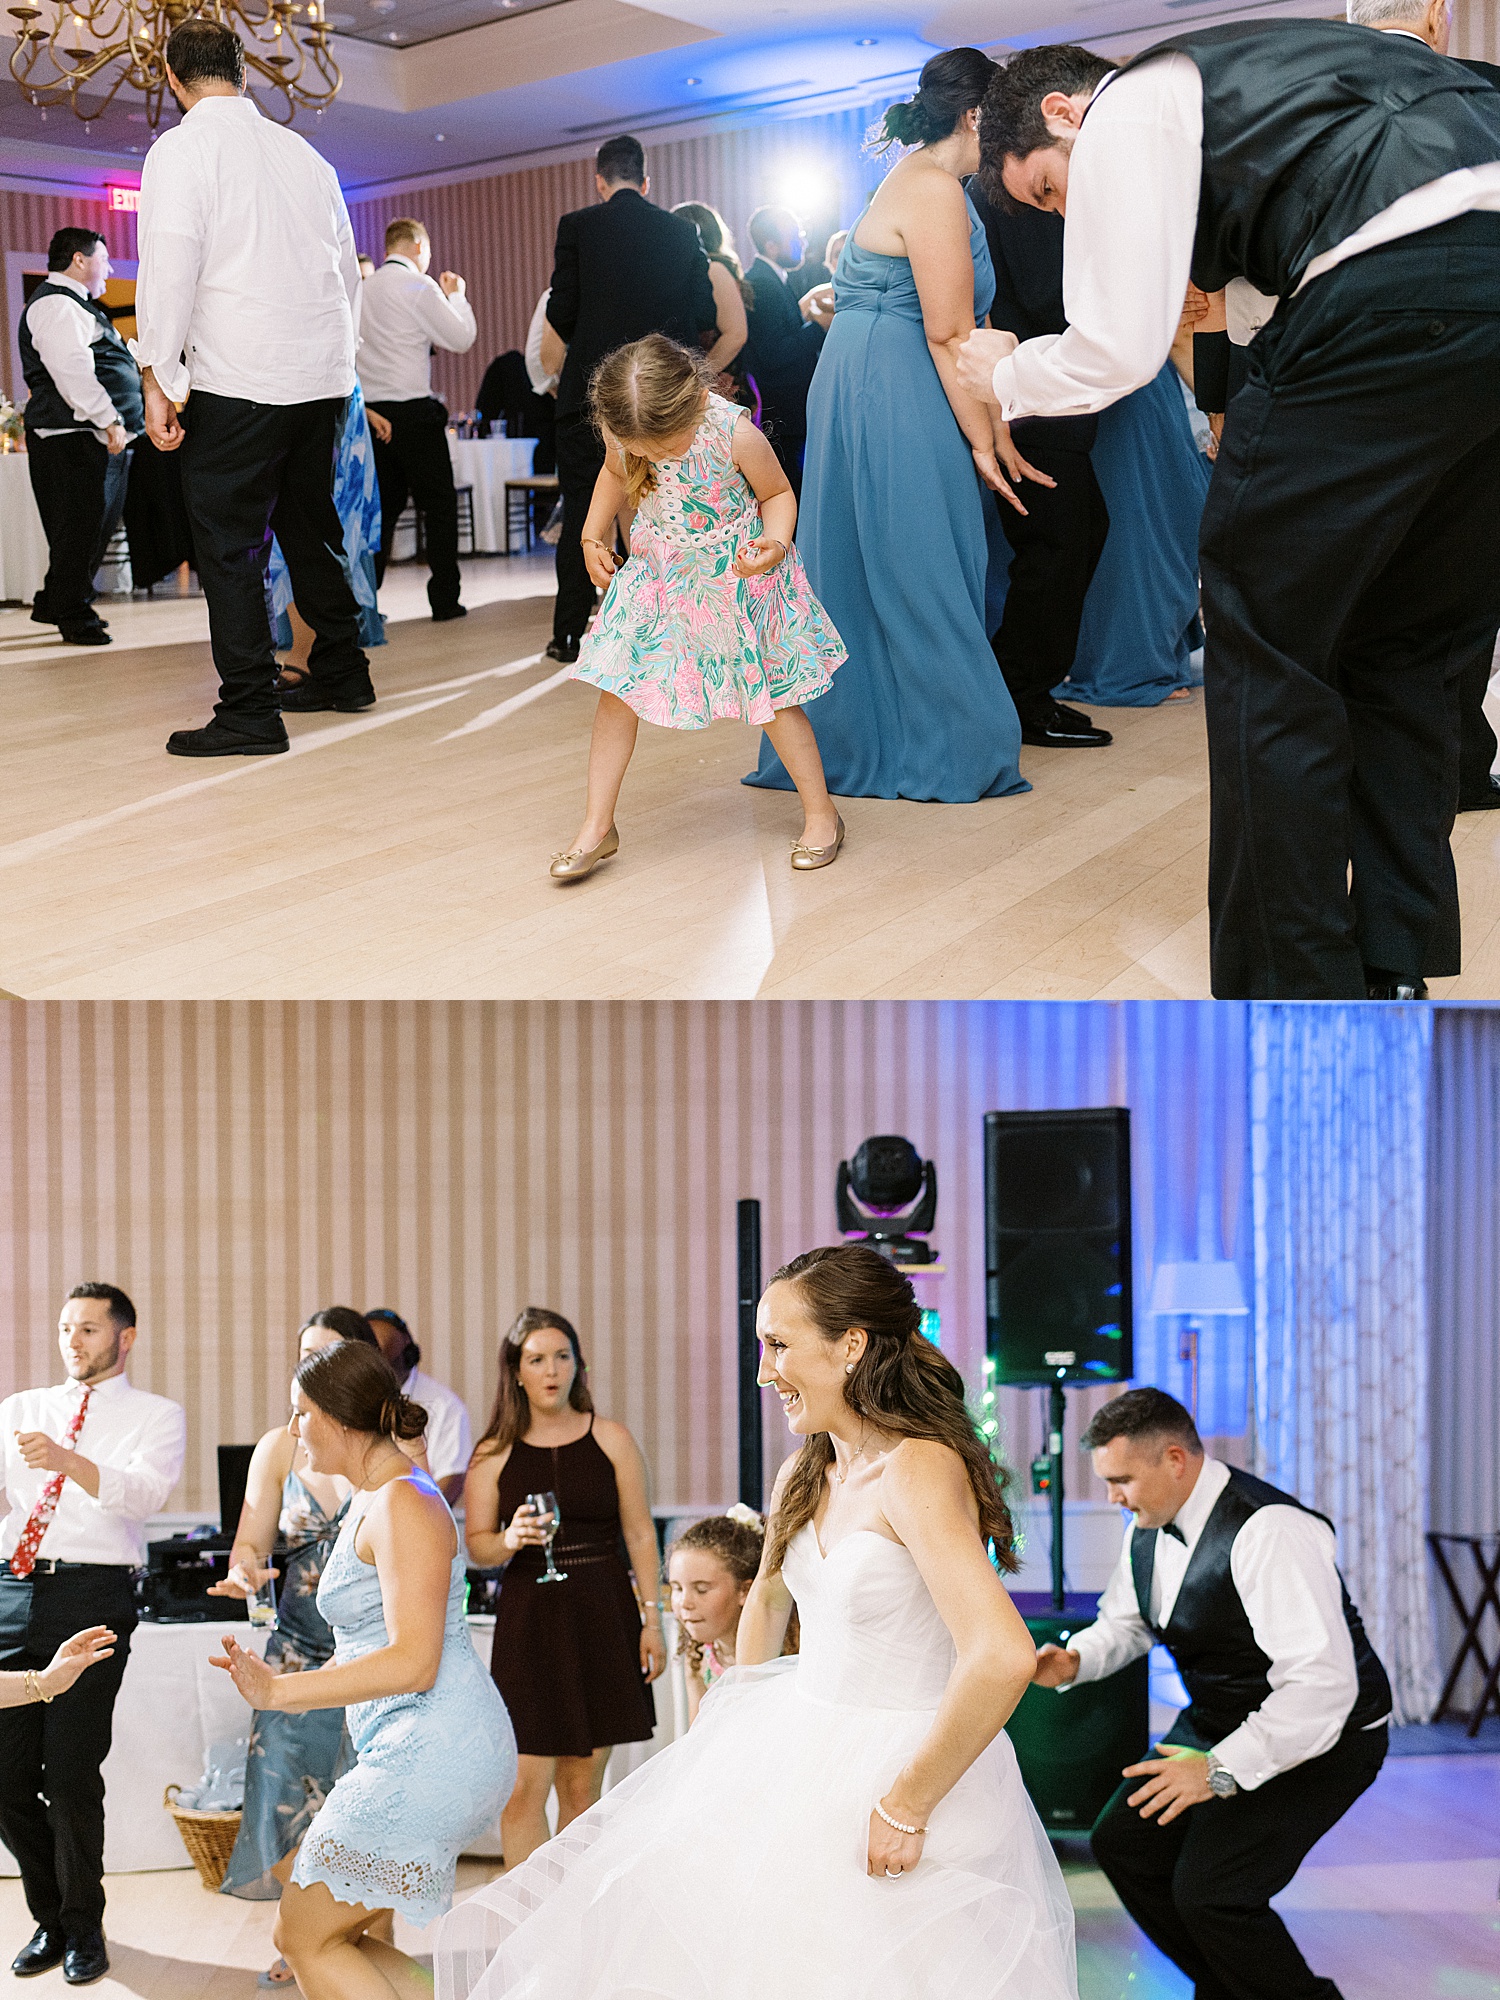 Guests dancing at reception by Massachusetts wedding photographer